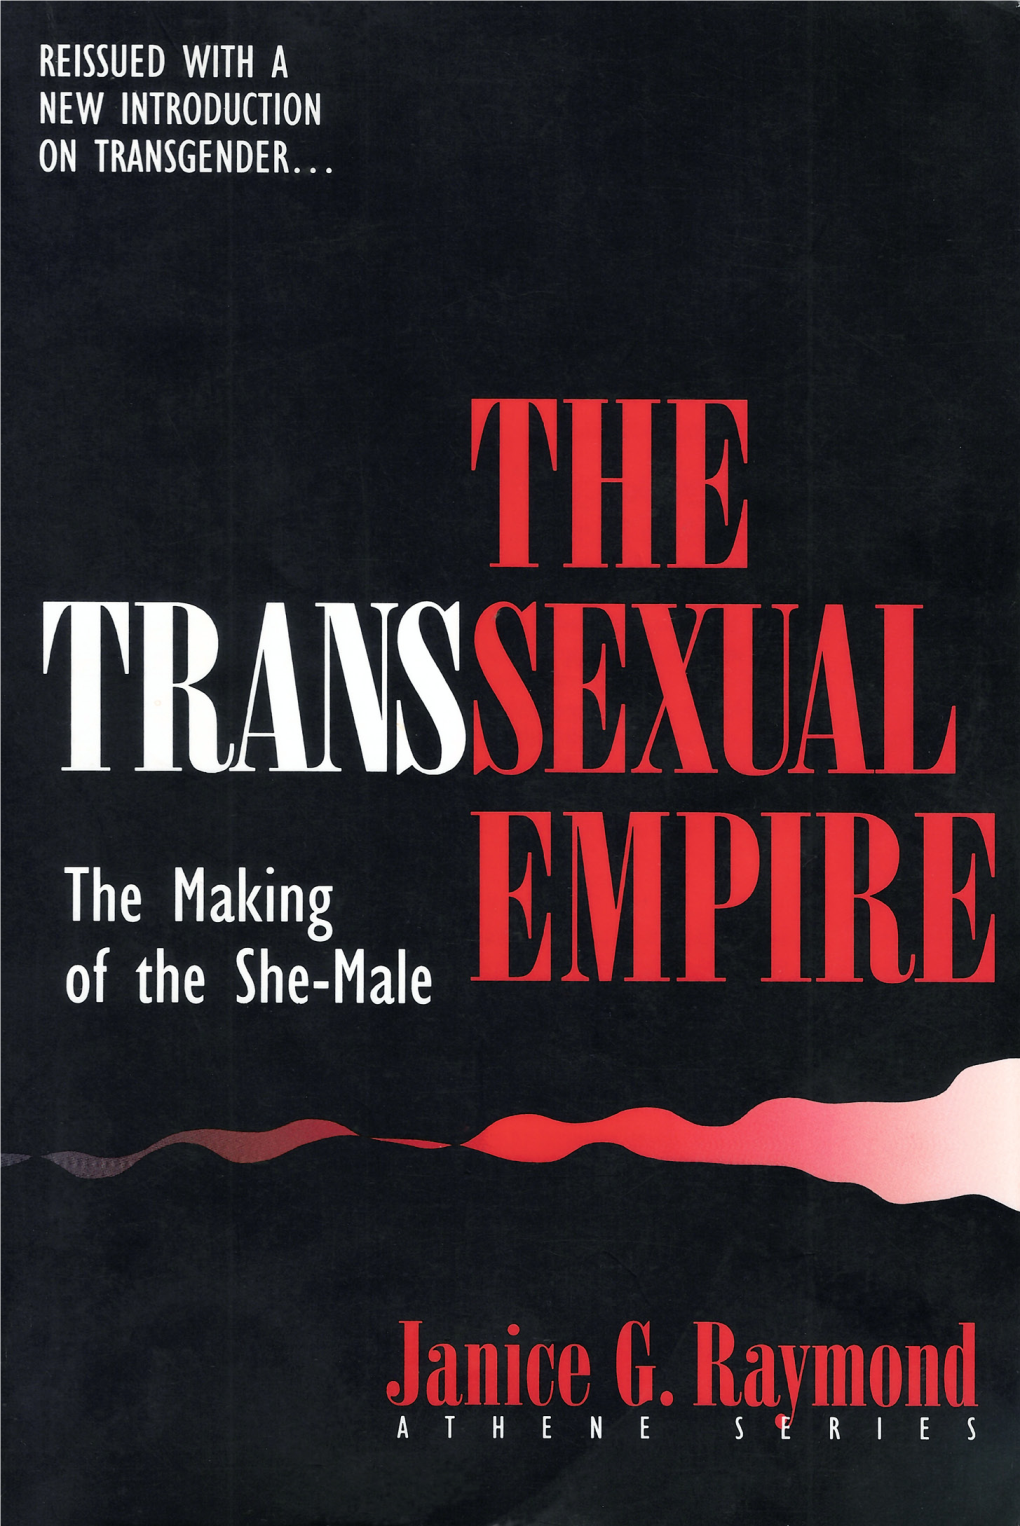 The Transsexual Empire: the Making of the She-Male / Janice G